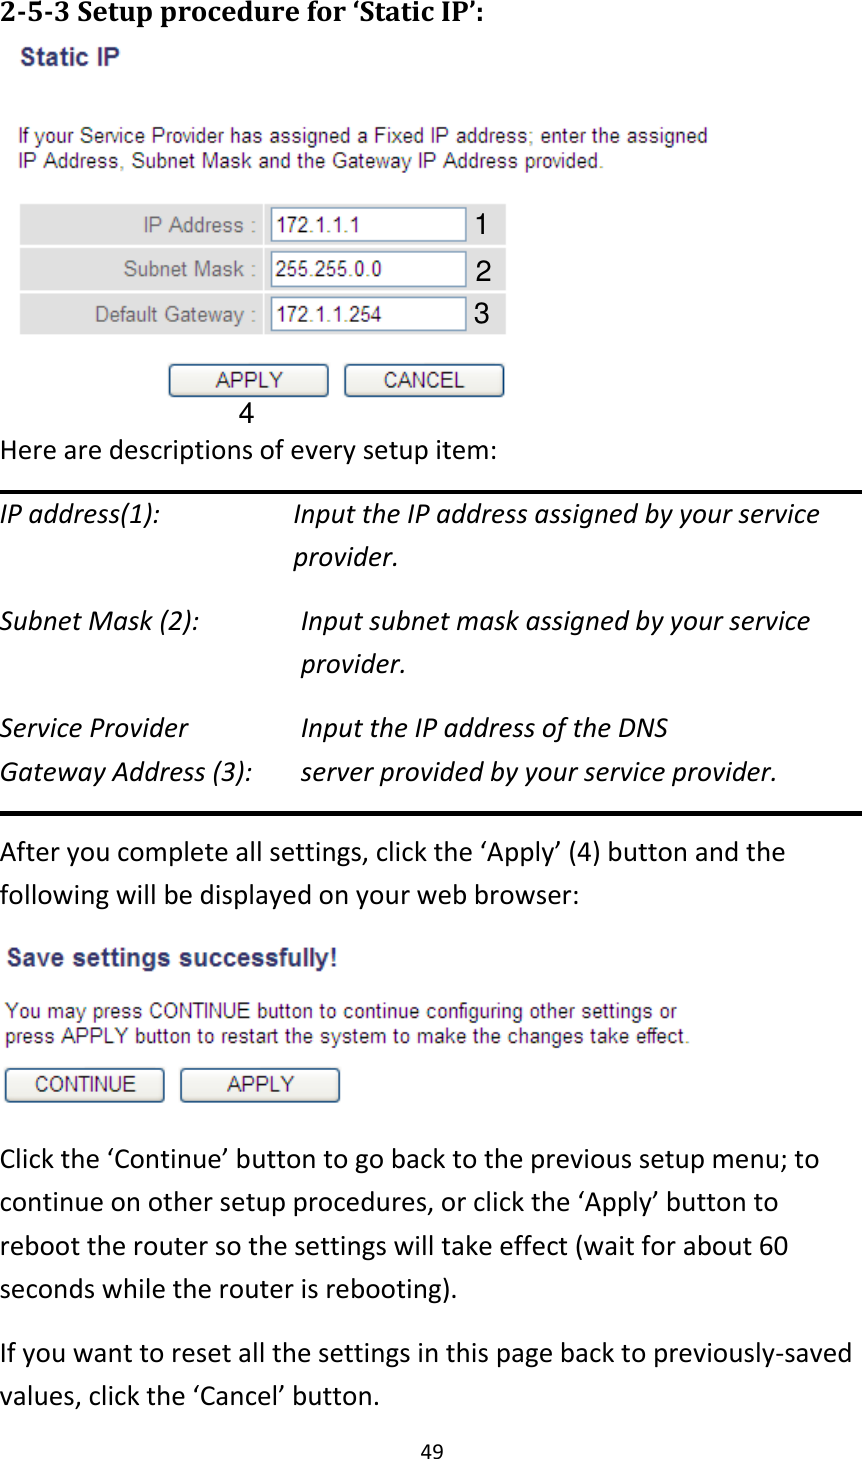 49 2-5-3 Setup procedure for ‘Static IP’:    Here are descriptions of every setup item: IP address(1):    Input the IP address assigned by your service    provider. Subnet Mask (2):    Input subnet mask assigned by your service provider.   Service Provider      Input the IP address of the DNS Gateway Address (3):    server provided by your service provider. After you complete all settings, click the ‘Apply’ (4) button and the following will be displayed on your web browser:  Click the ‘Continue’ button to go back to the previous setup menu; to continue on other setup procedures, or click the ‘Apply’ button to reboot the router so the settings will take effect (wait for about 60 seconds while the router is rebooting). If you want to reset all the settings in this page back to previously-saved values, click the ‘Cancel’ button. 1 2 3 4 